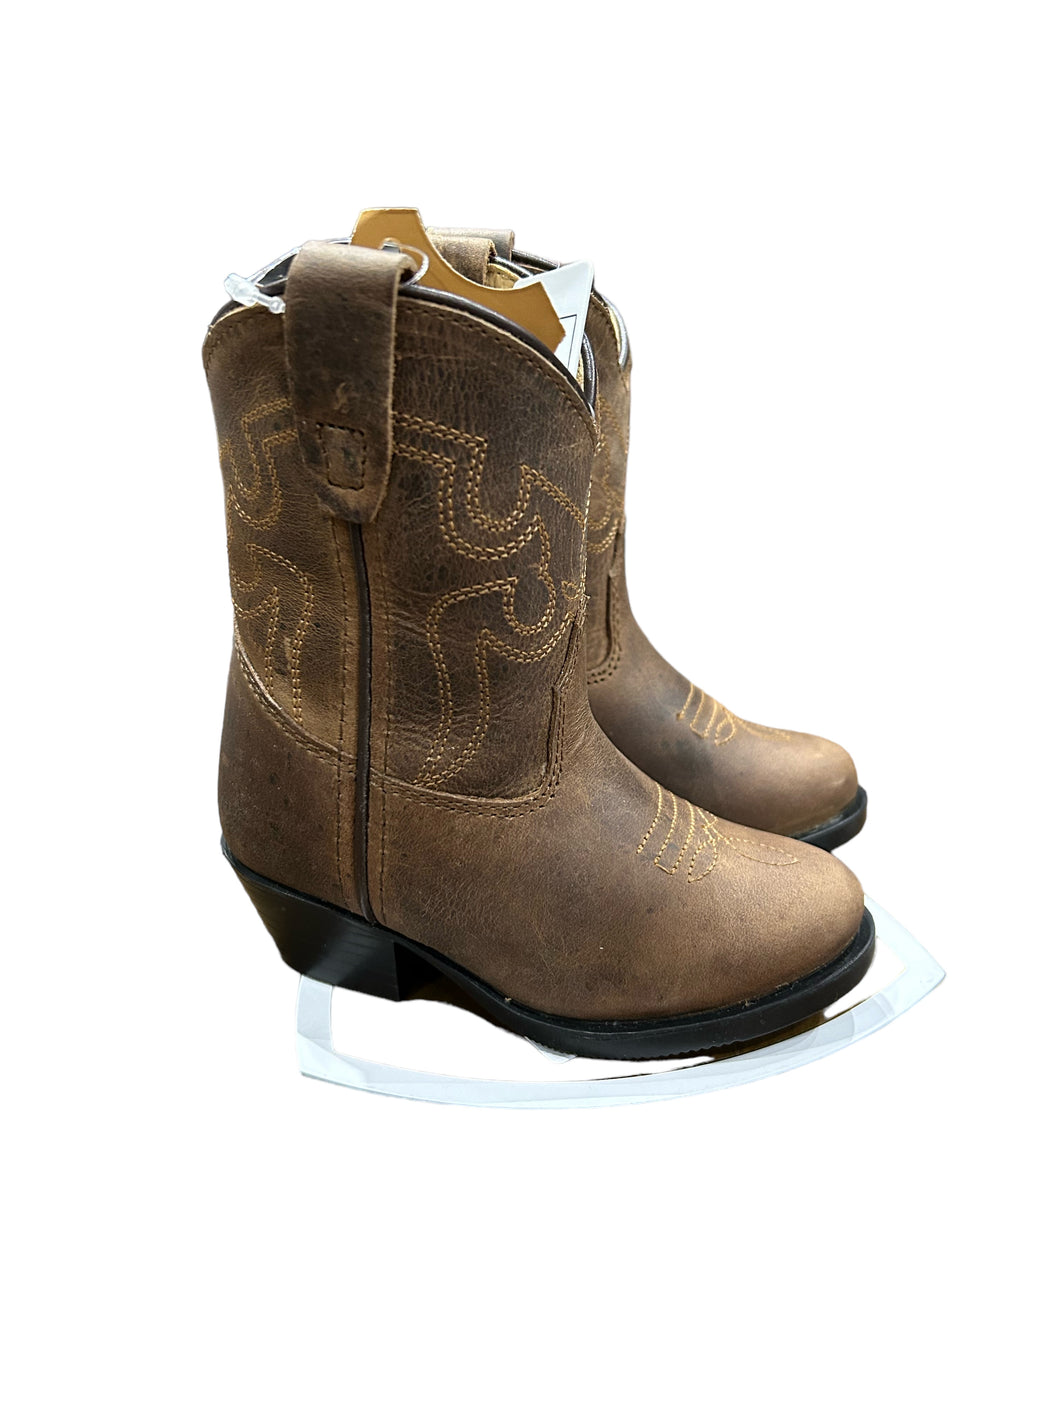 Smoky Mountain Boots 3034T Denver Brown Western Toddler Boots